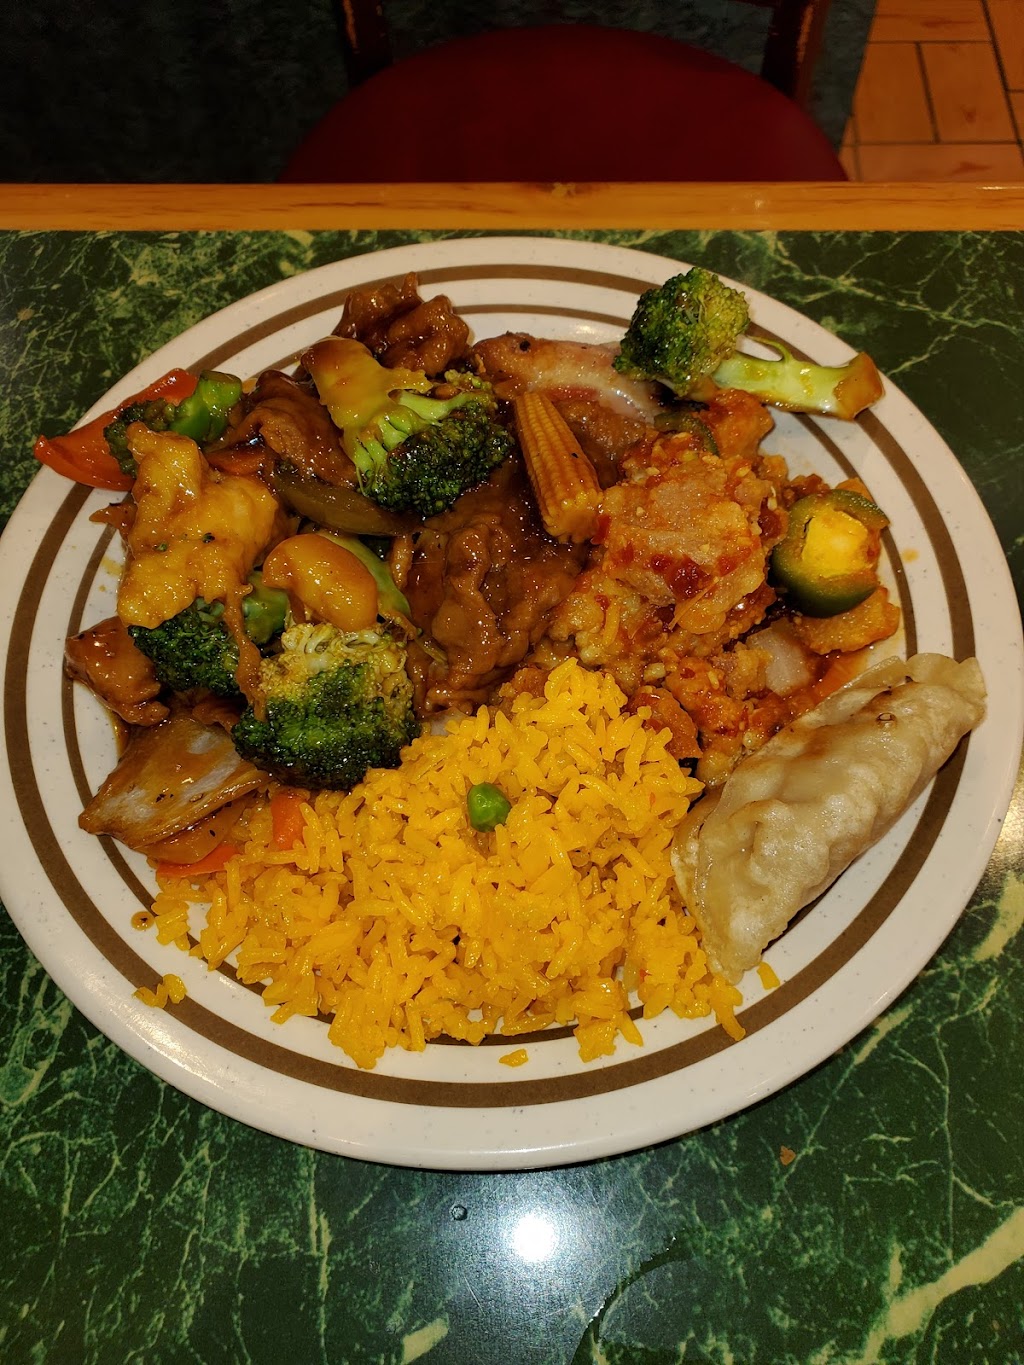 China Wok | 345 Downtowner Plaza, Coshocton, OH 43812 | Phone: (740) 622-0018